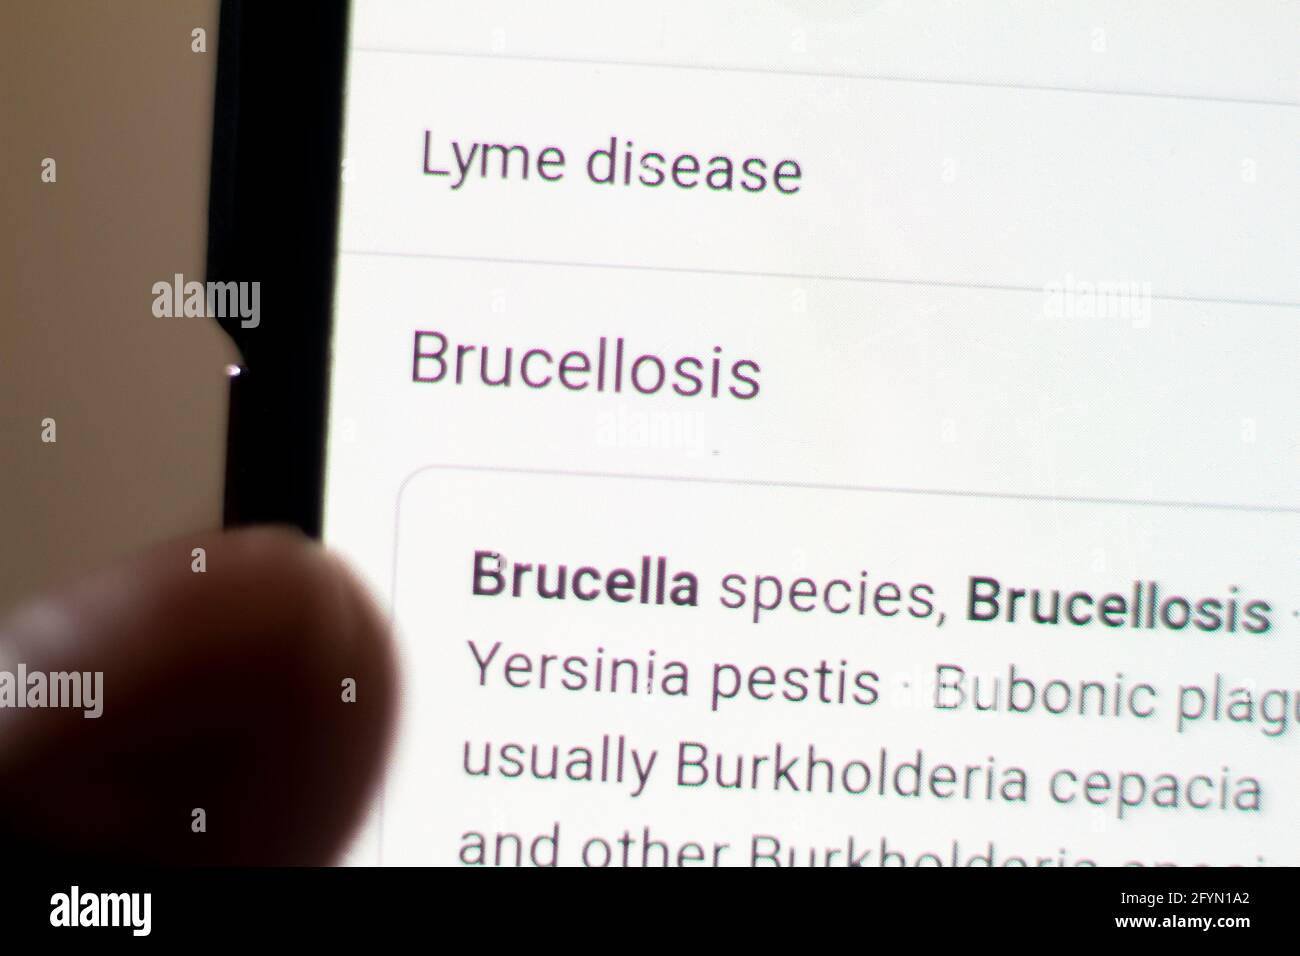 Brucellosis News on the phone.Mobile phone in hands. selective focus and chromatic aberration effects. Stock Photo